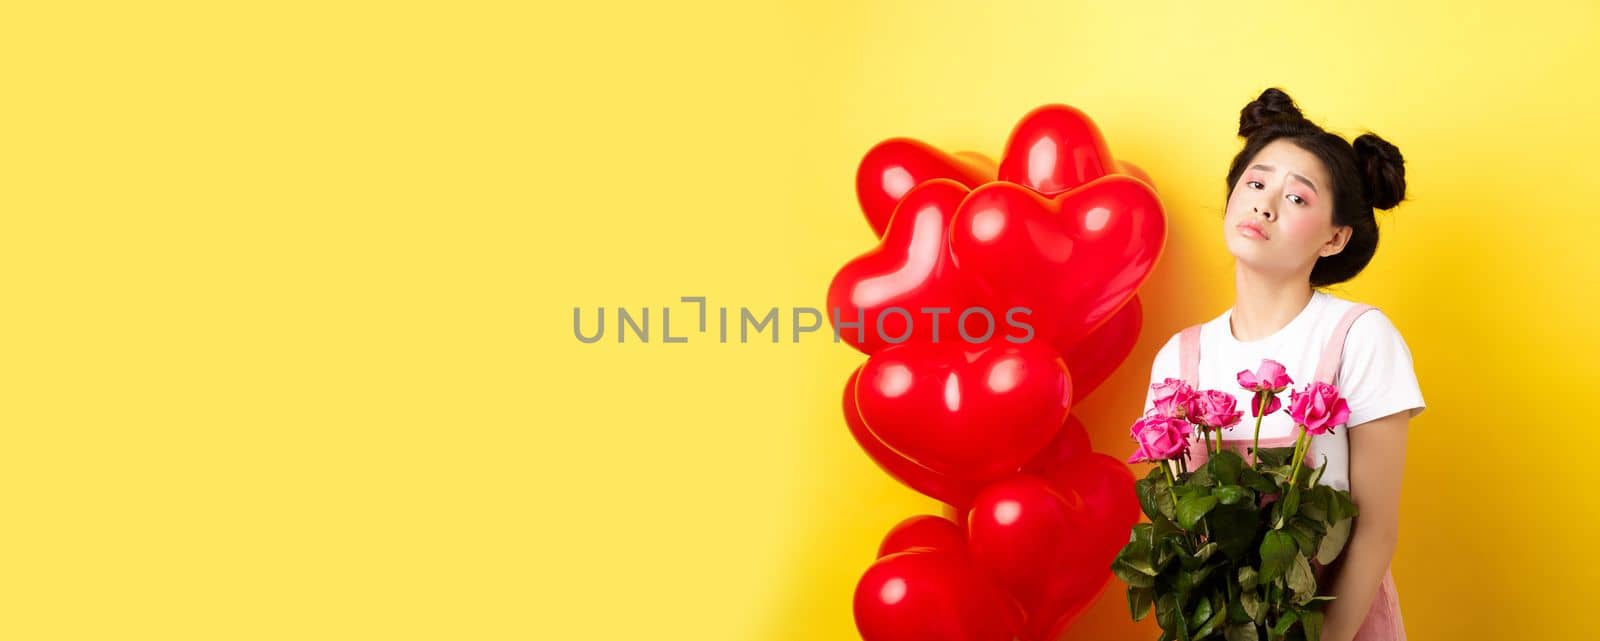 Happy Valentines concept. Sad and gloomy asian woman holding bouquet of roses and feeling upset and lonely on romantic lovers day, standing near red heart balloons, yellow background by Benzoix